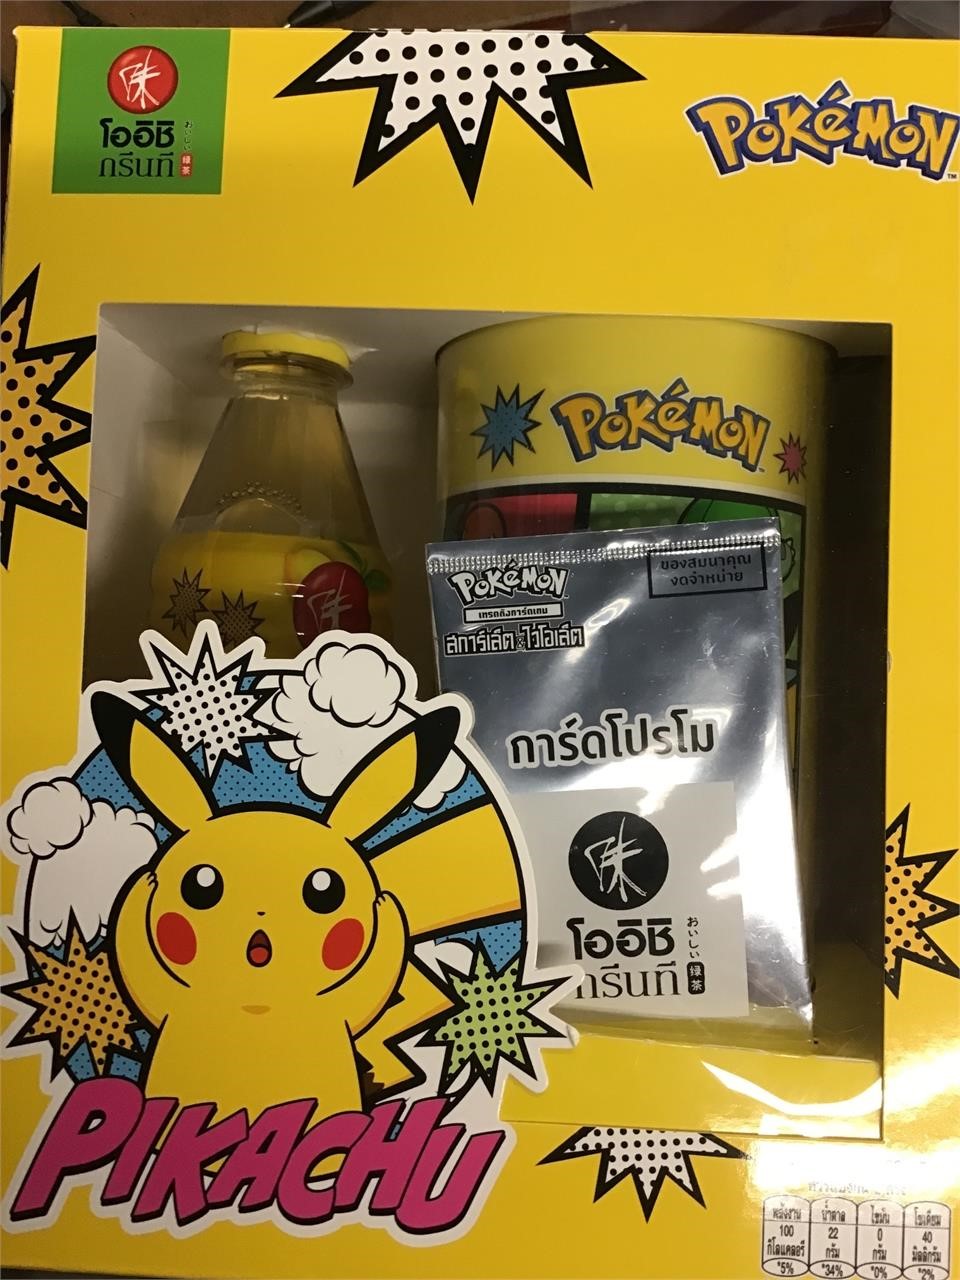 Pokemon pikachu collectors cup and card limited E